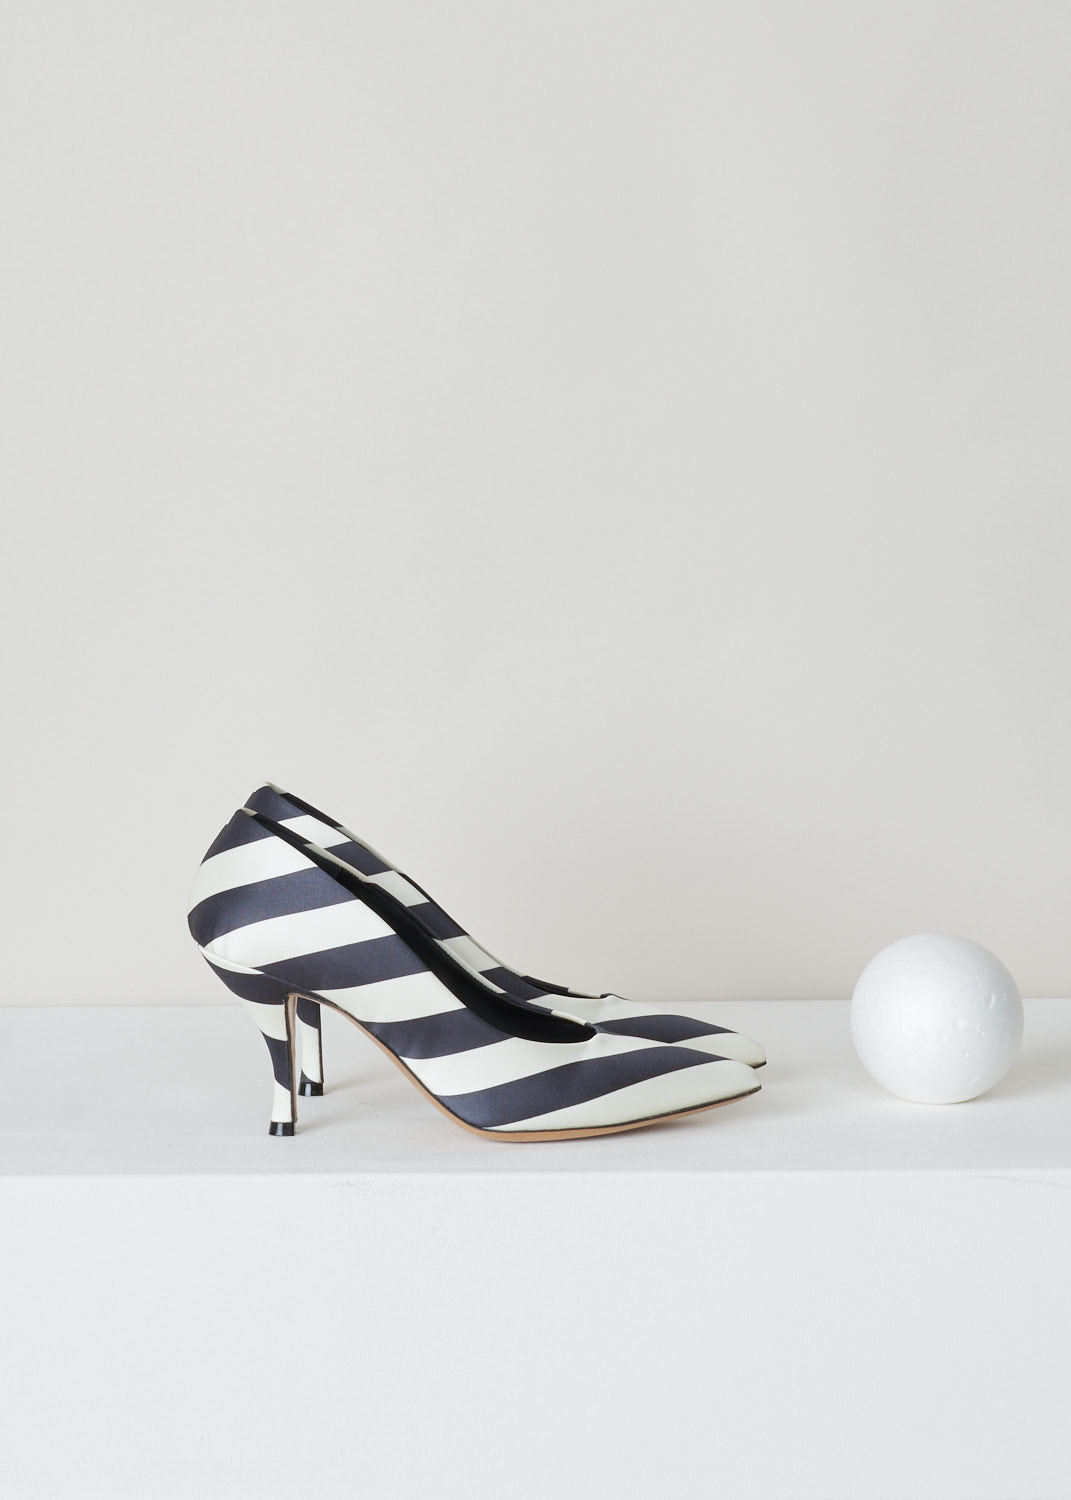 Dries van Noten, Black and white striped pumps, WS25_153_80_QU160_black900, black white, side,  Black and white colored pump, featuring a tapered heel and pointed toe. 

Heel height: 8 cm / 3.14 inch. 